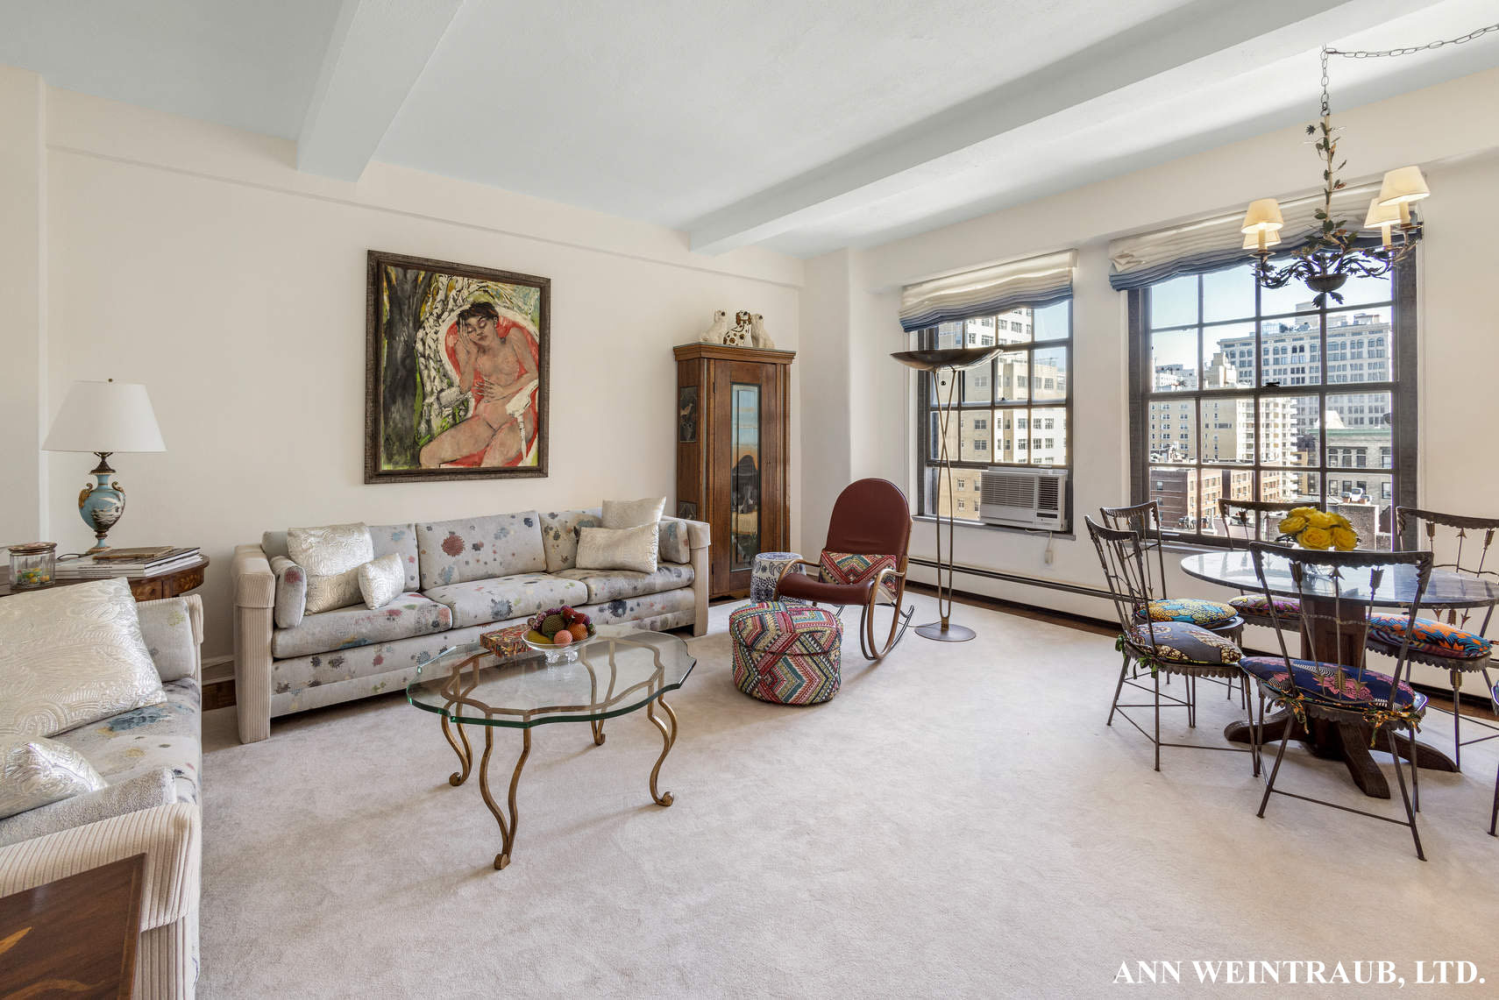 Cooperative for Sale at Greenwich Village, Manhattan, NY 10003